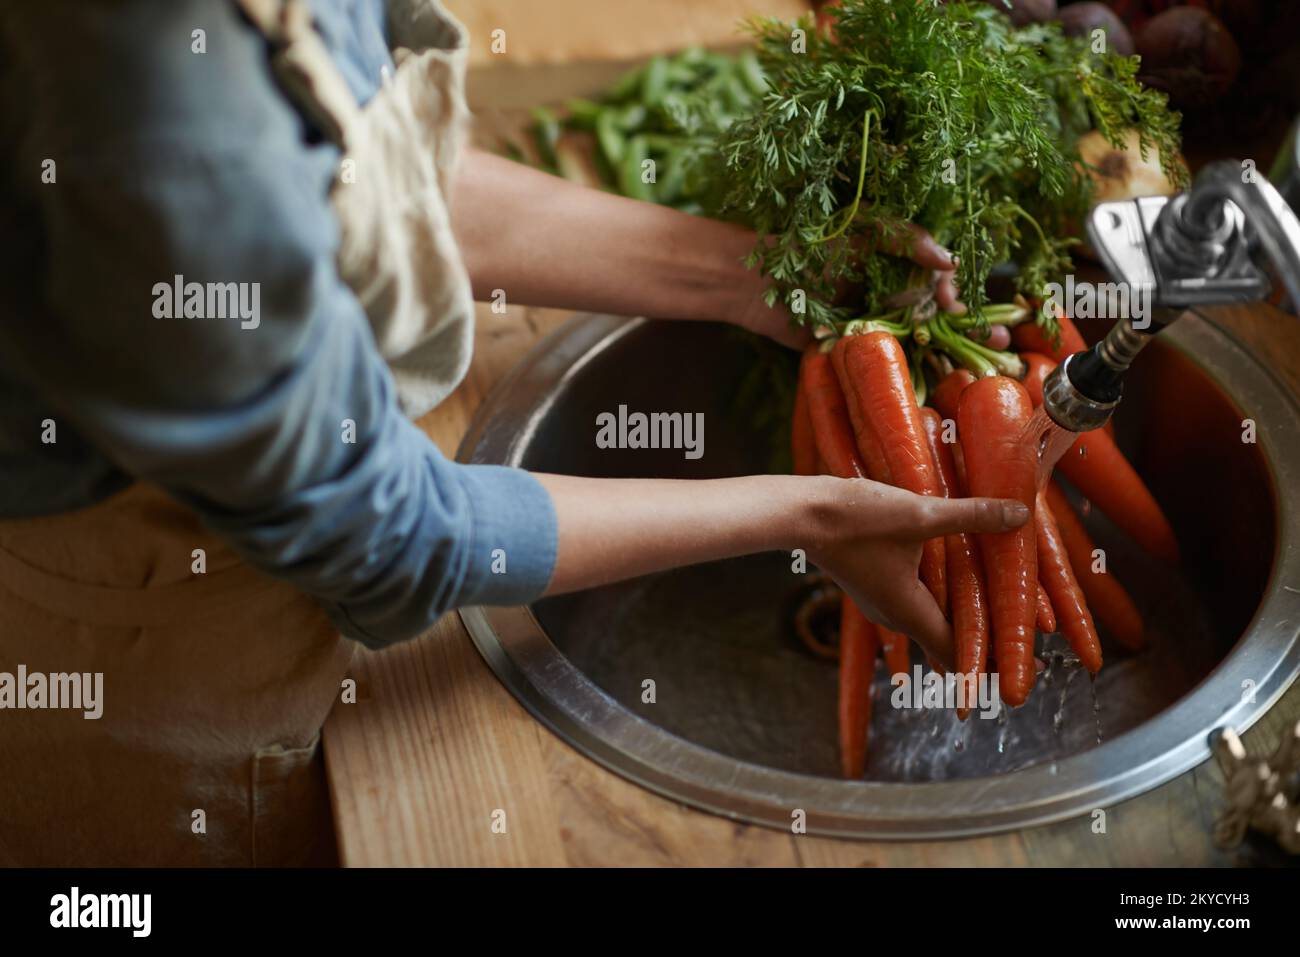 Washing them off before its time to cook. a woman washing carrots in a sink. Stock Photo